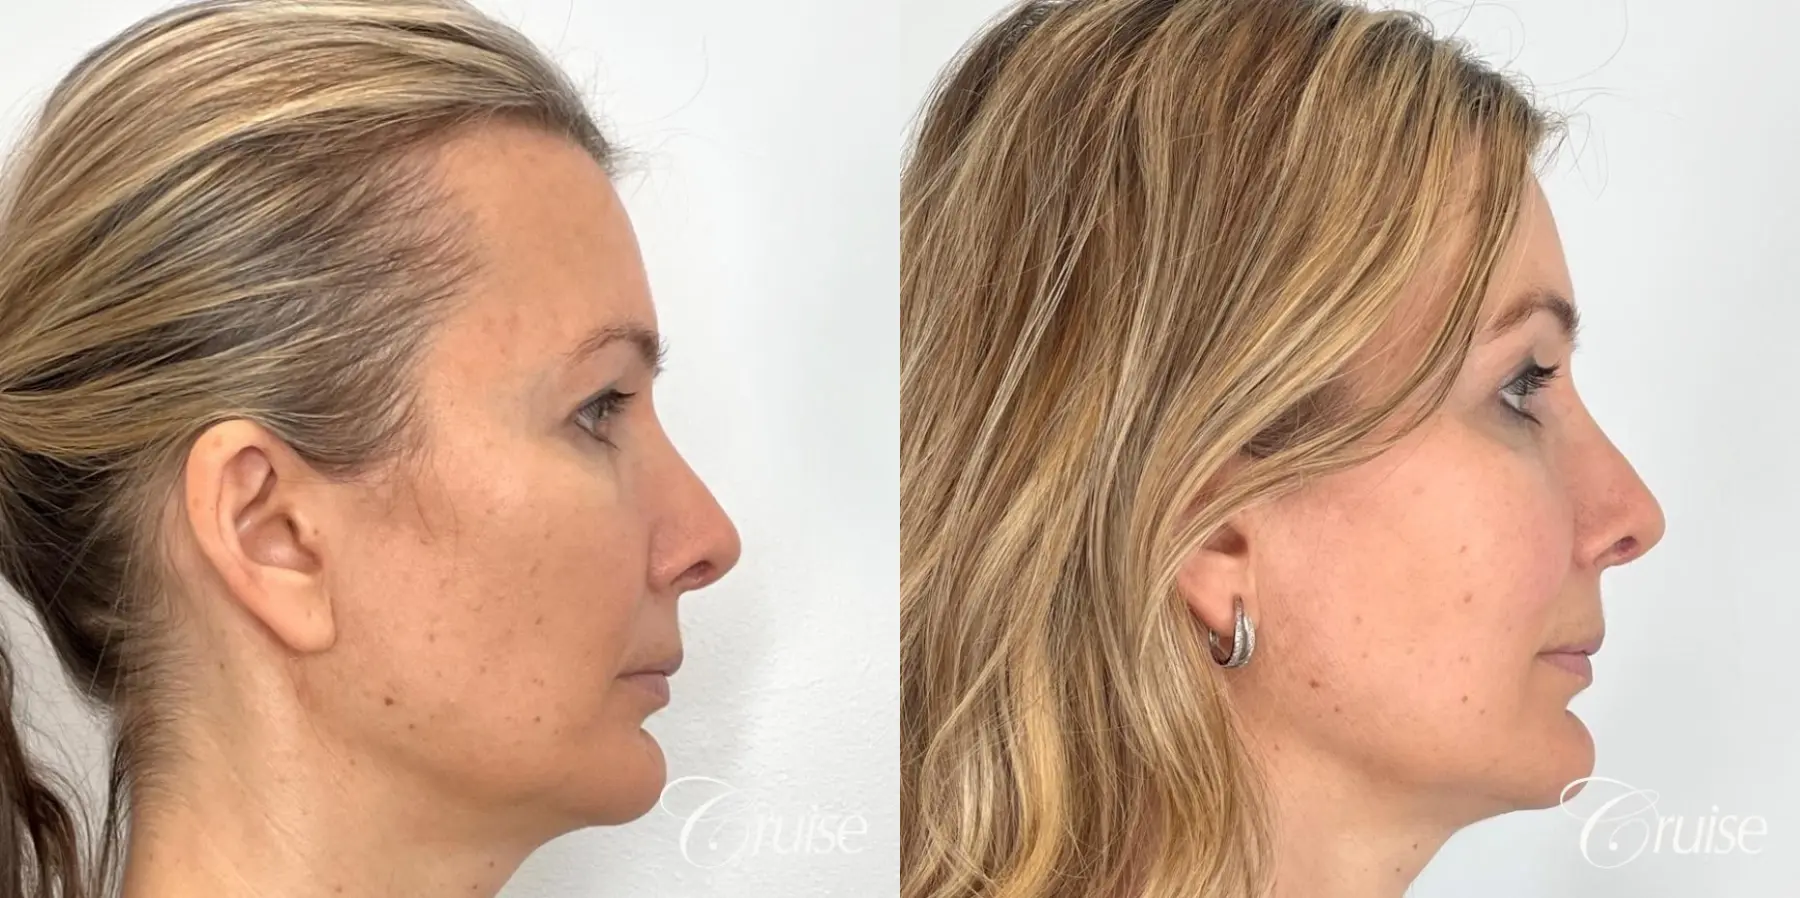 Fat Transfer for Facial Rejuvenation - Before and After 3